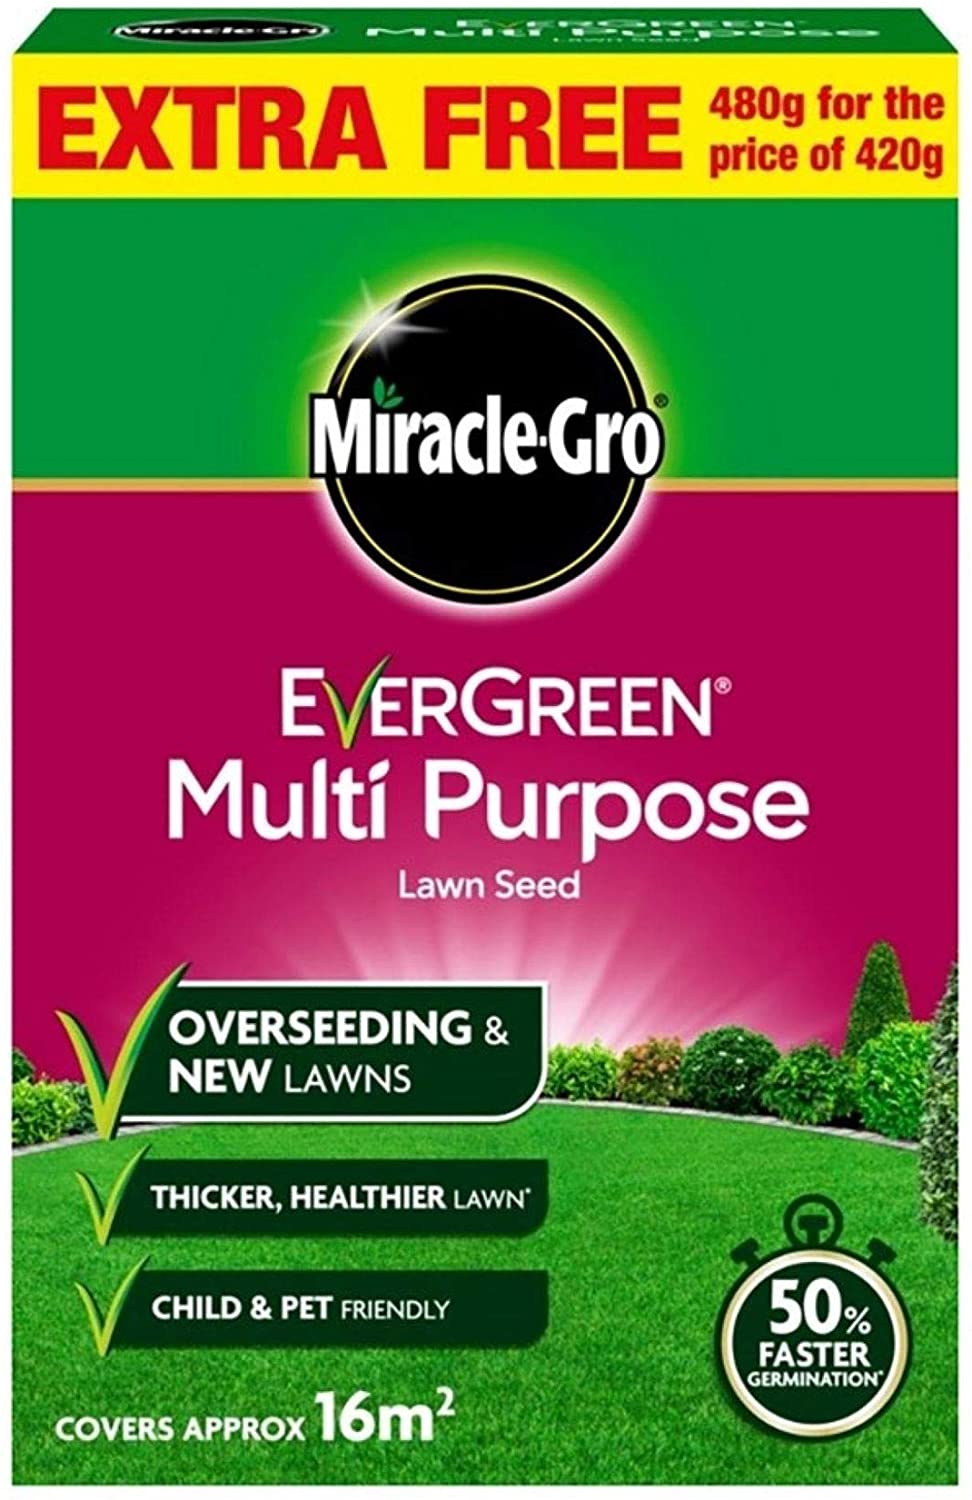 Miracle-Gro-Evergreen-Multi-Purpose-Lawn-Seed-480g-Covers-16m2